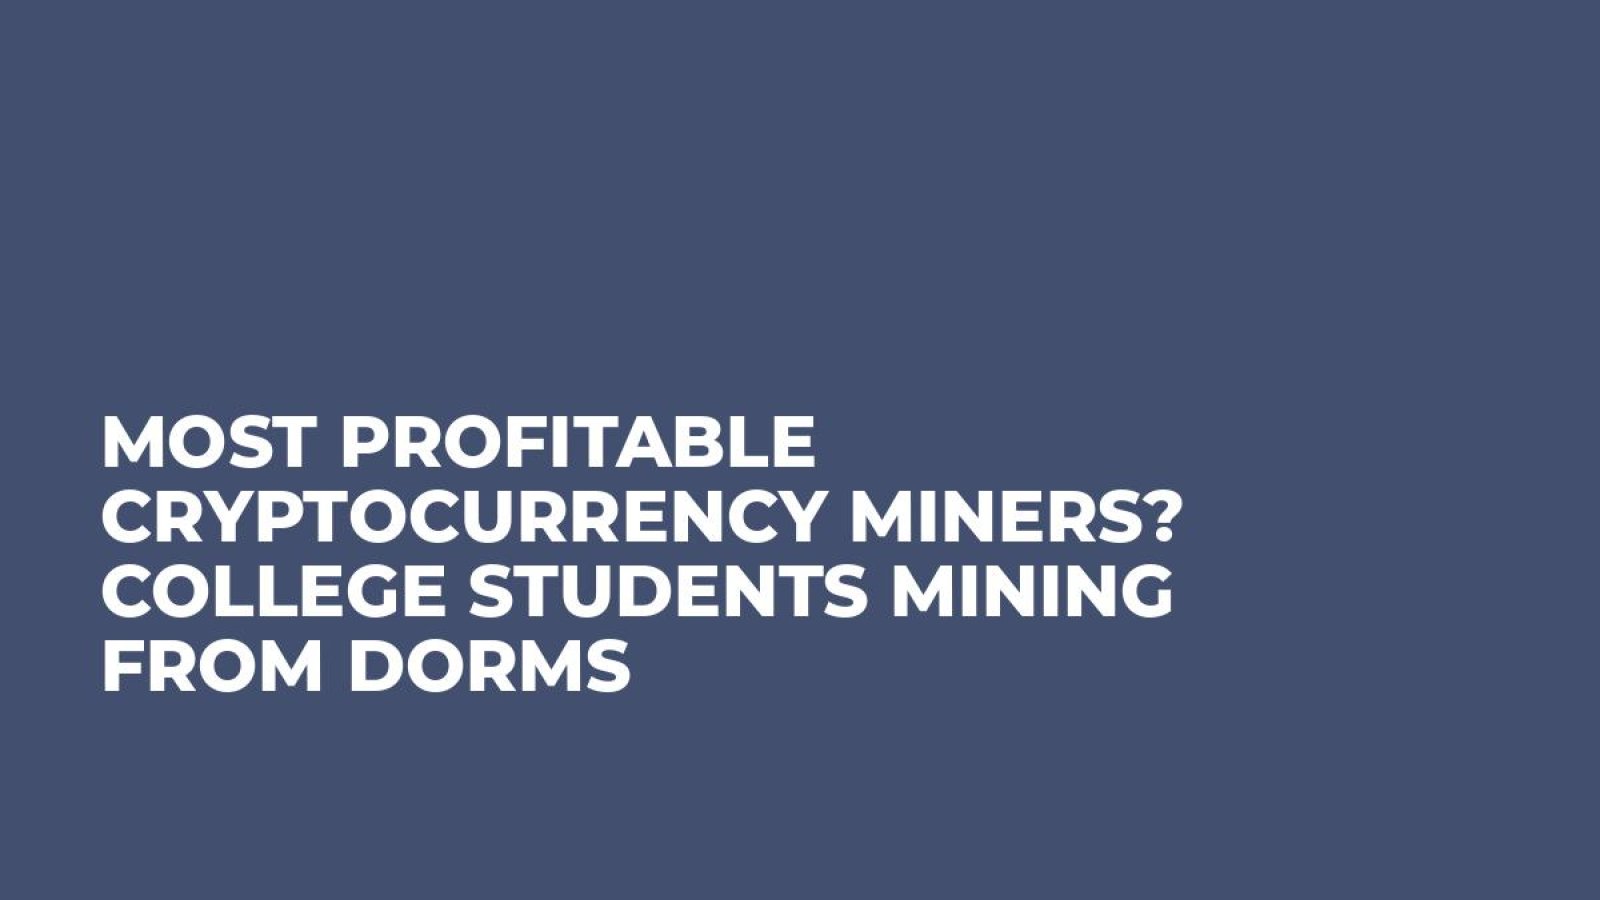 Most Profitable Cryptocurrency Miners? College Students Mining from Dorms